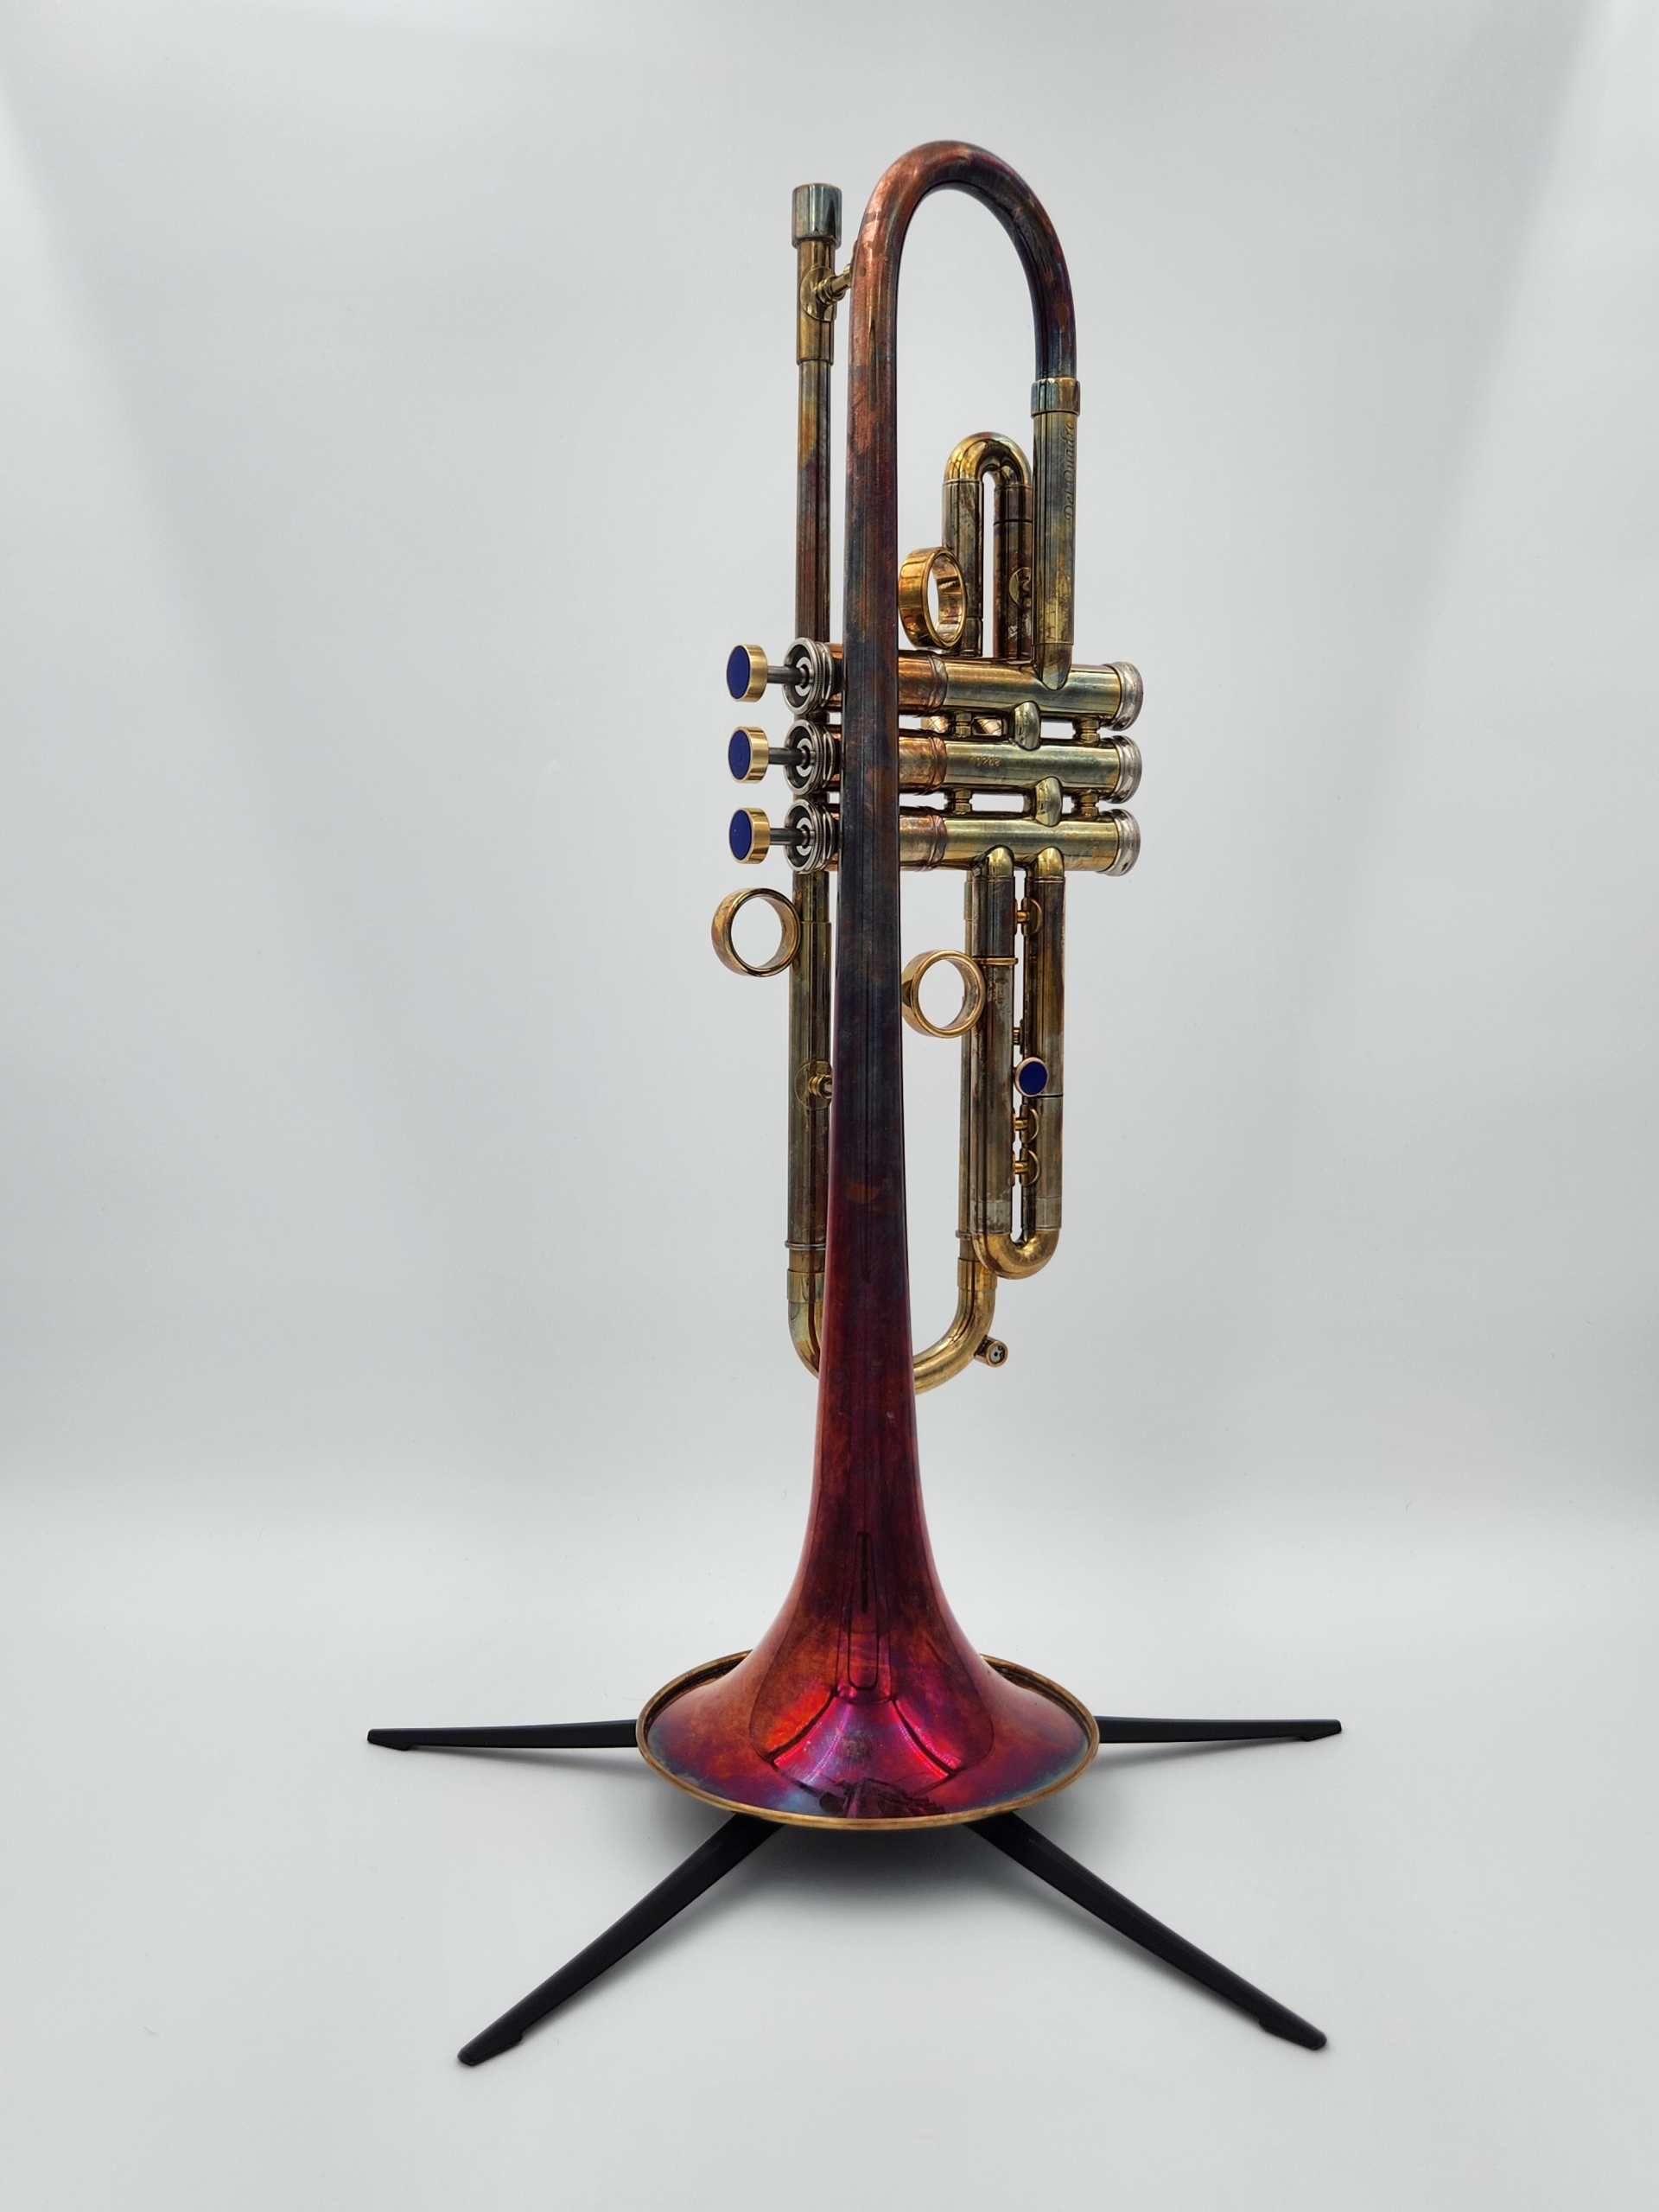 Del Quadro Custom Grande Campana trumpet with a 'I Spit Hot Fire' acid finish with lapis inlays